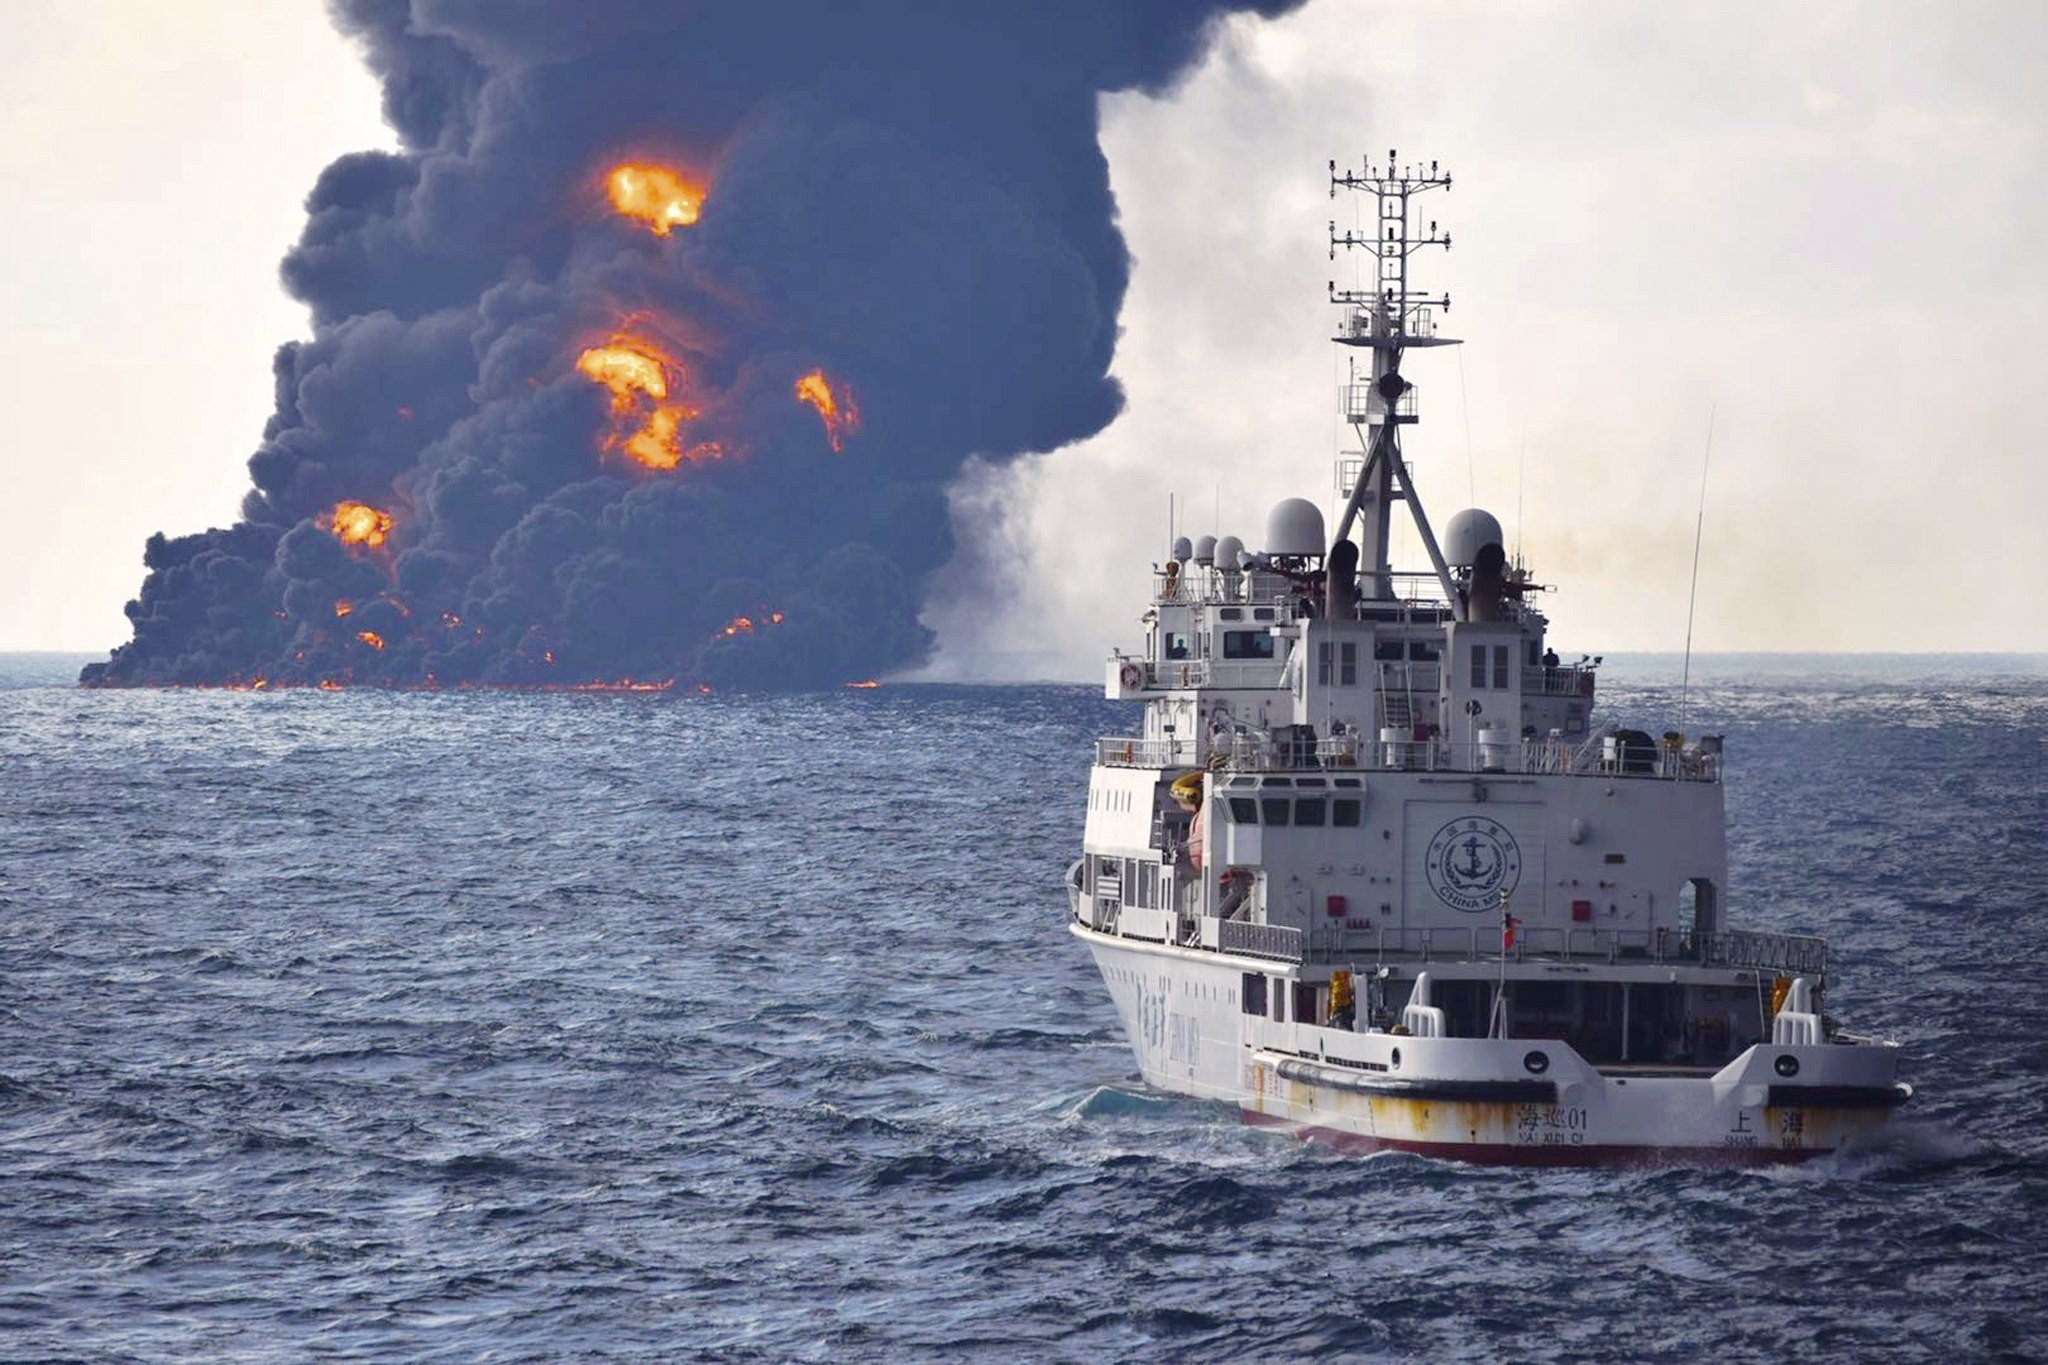 A handout photo shows the fire on the Panama-registered tanker ‘Sanchi’ after a collision with Hong Kong-registered freighter ‘CF Crystal,’ off China’s eastern coast, 14 January 2018. Photo: EPA-EFE